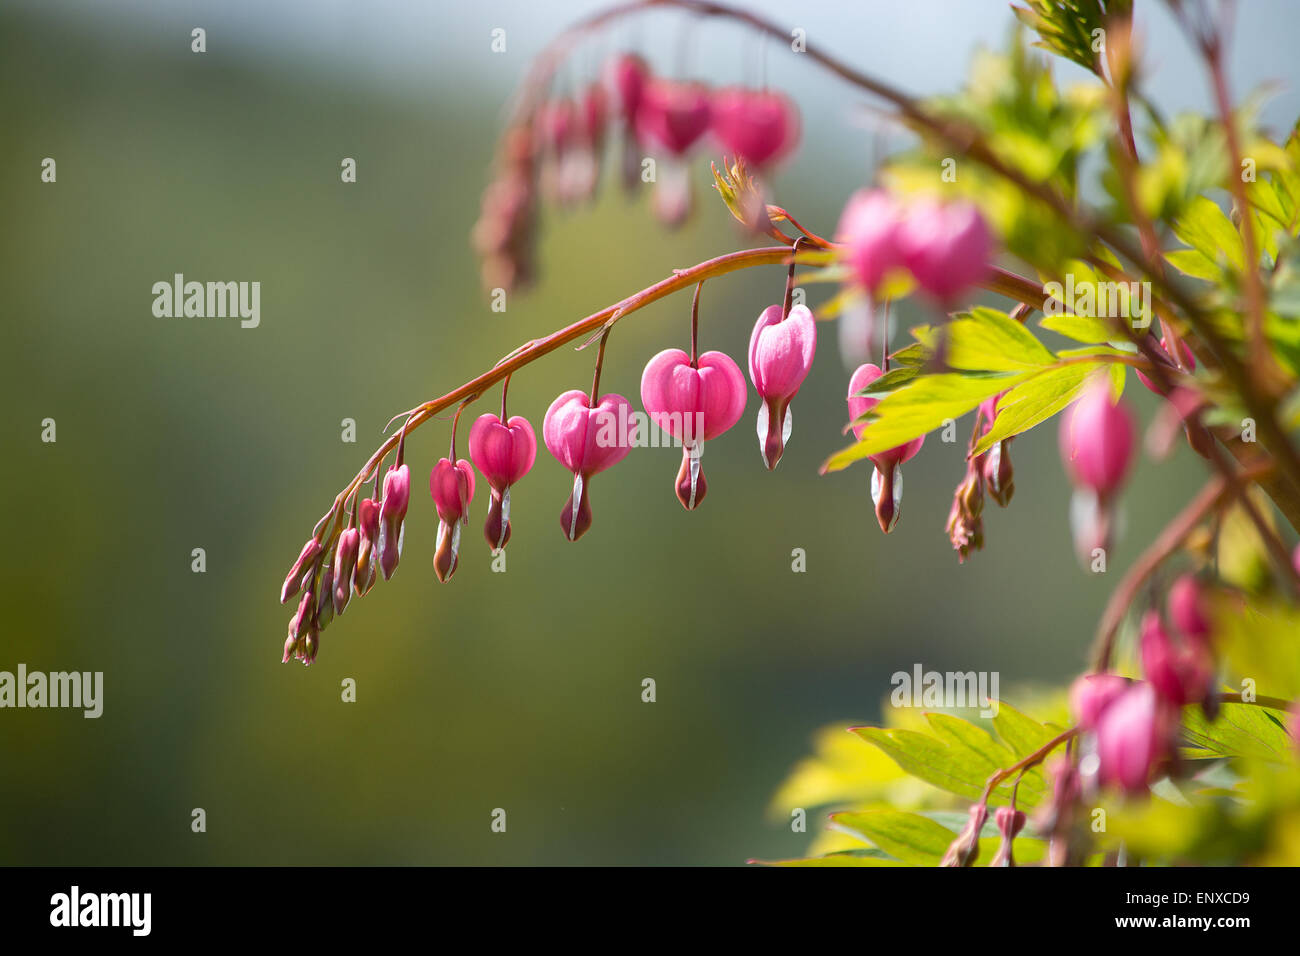 Pink bleeding heart flowers (Dicentra) on a bush closeup in May garden. Stock Photo